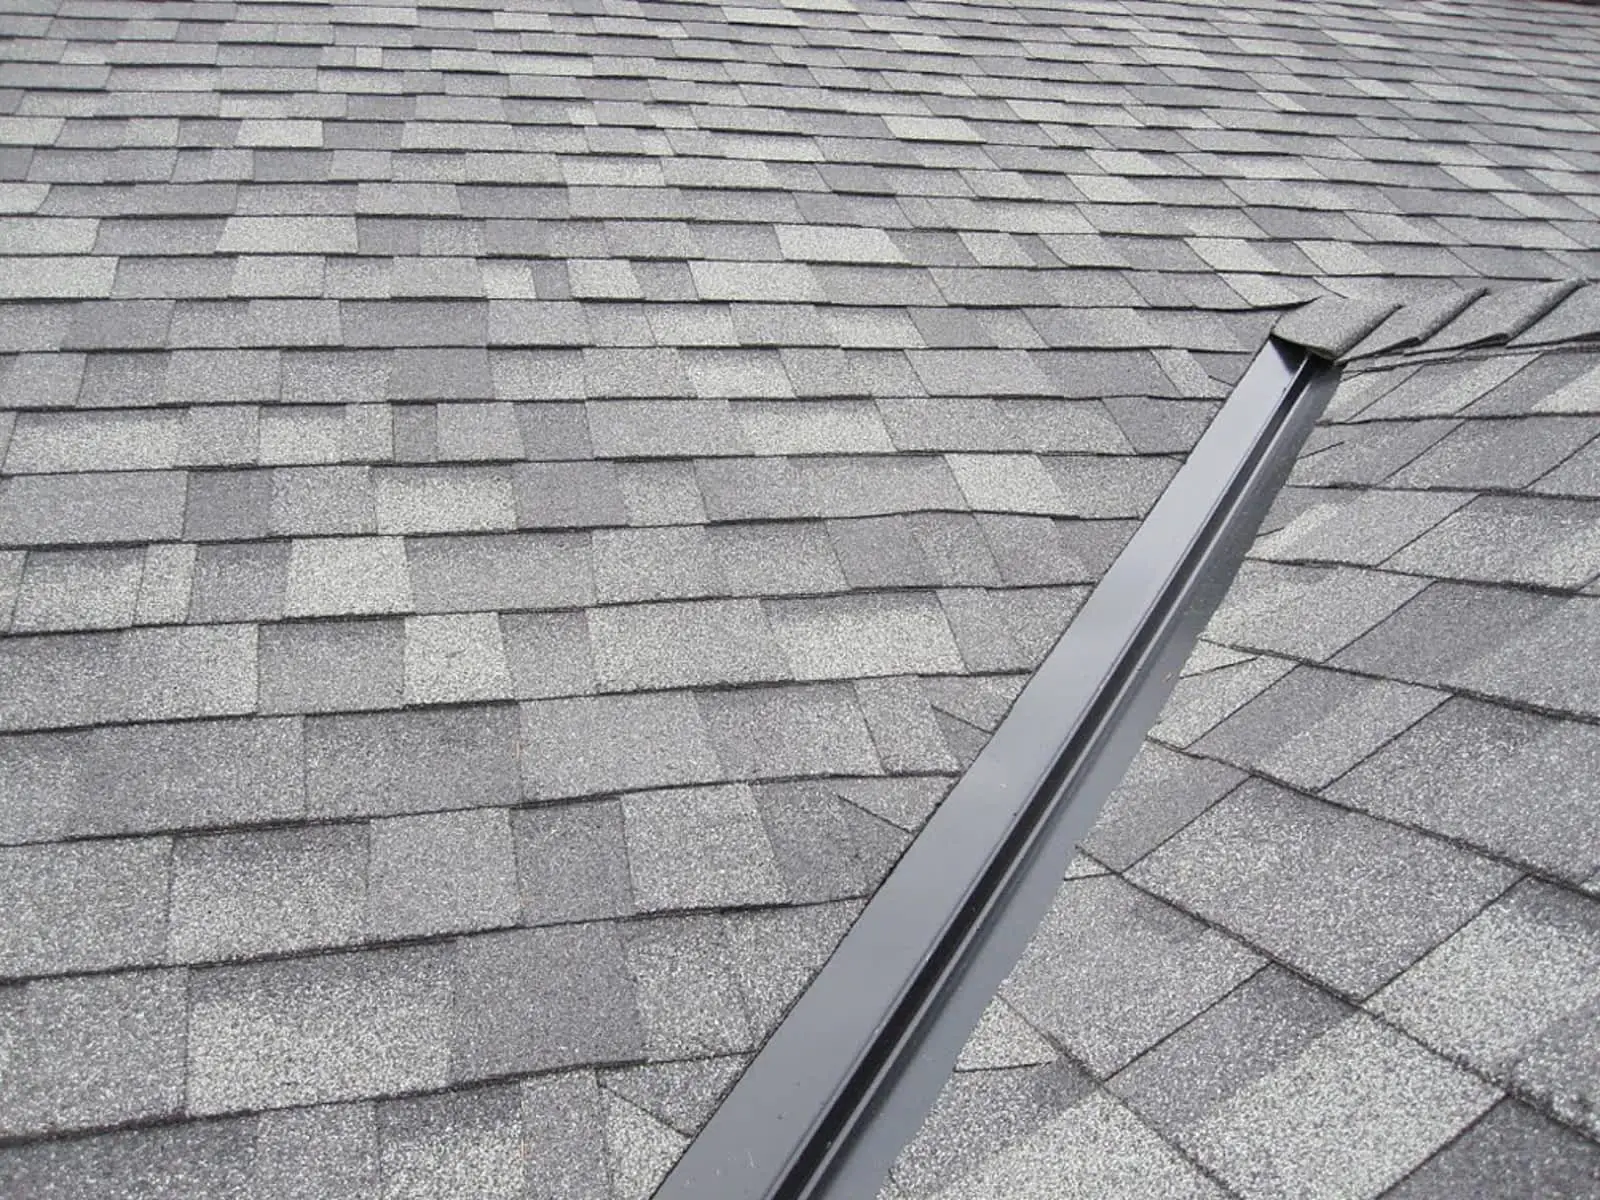 When should you replace your roof flashing?